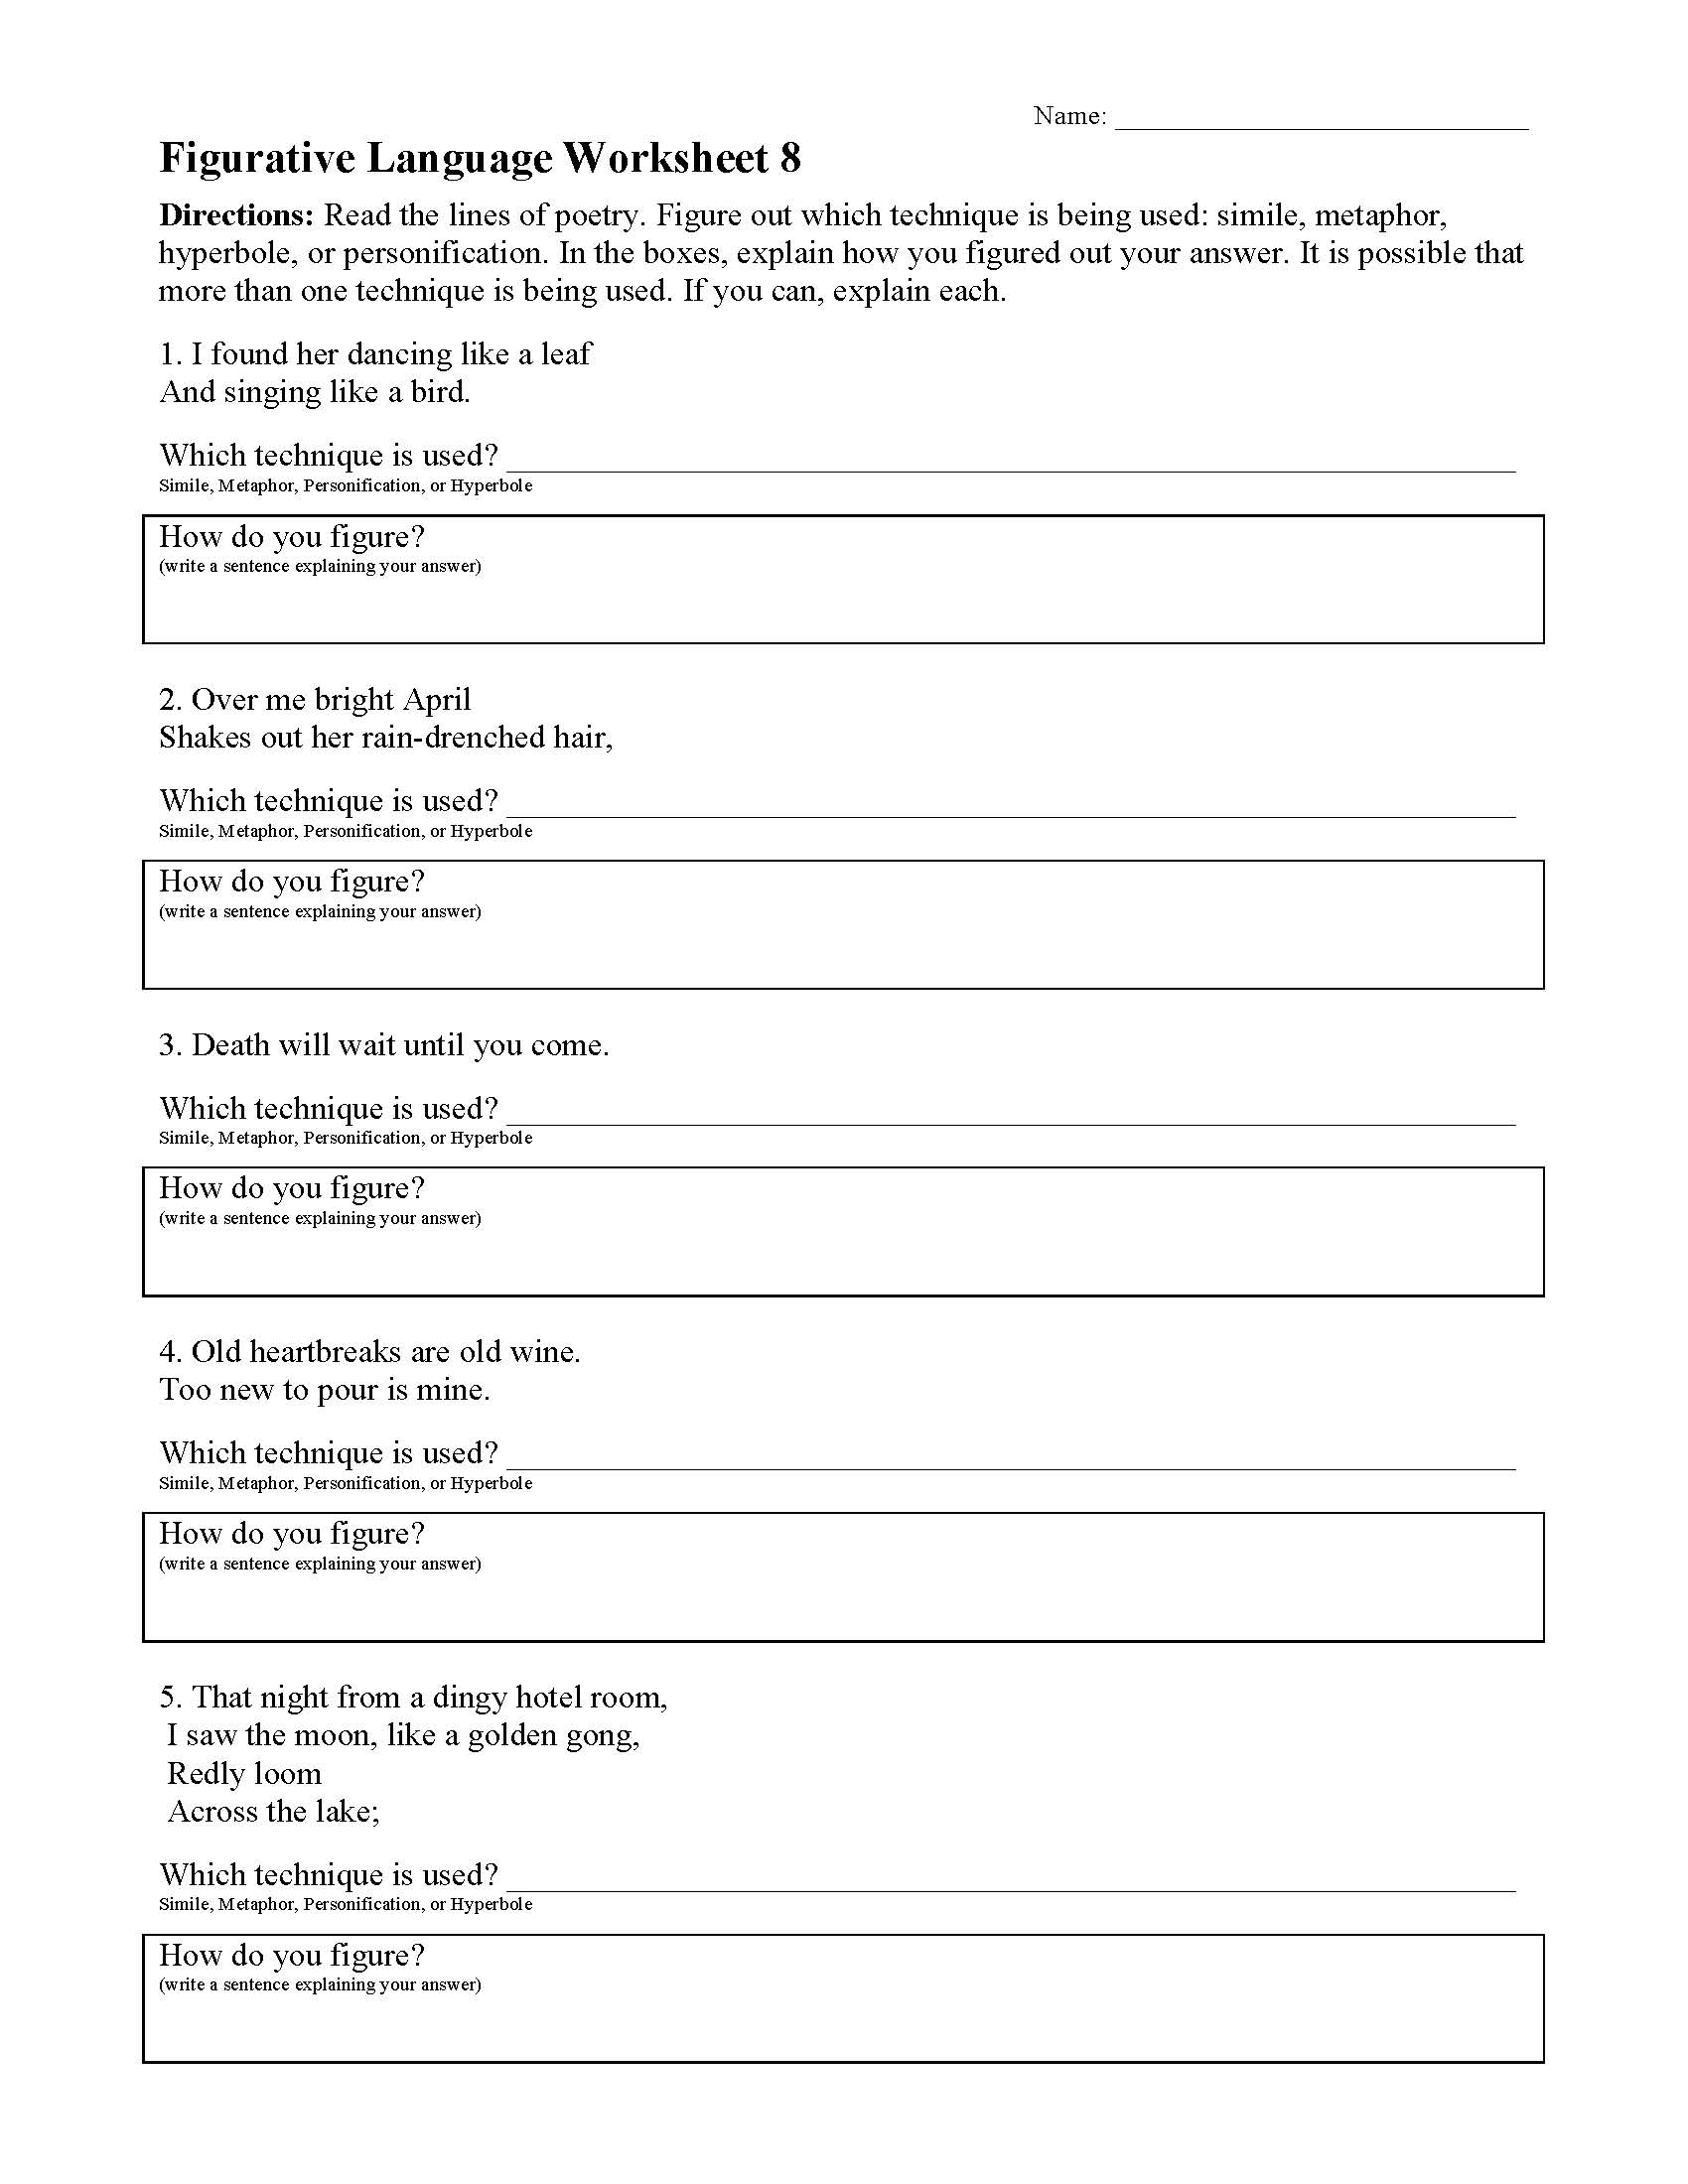 This is a preview image of Figurative Language Worksheet 8. Click on it to enlarge it or view the source file.